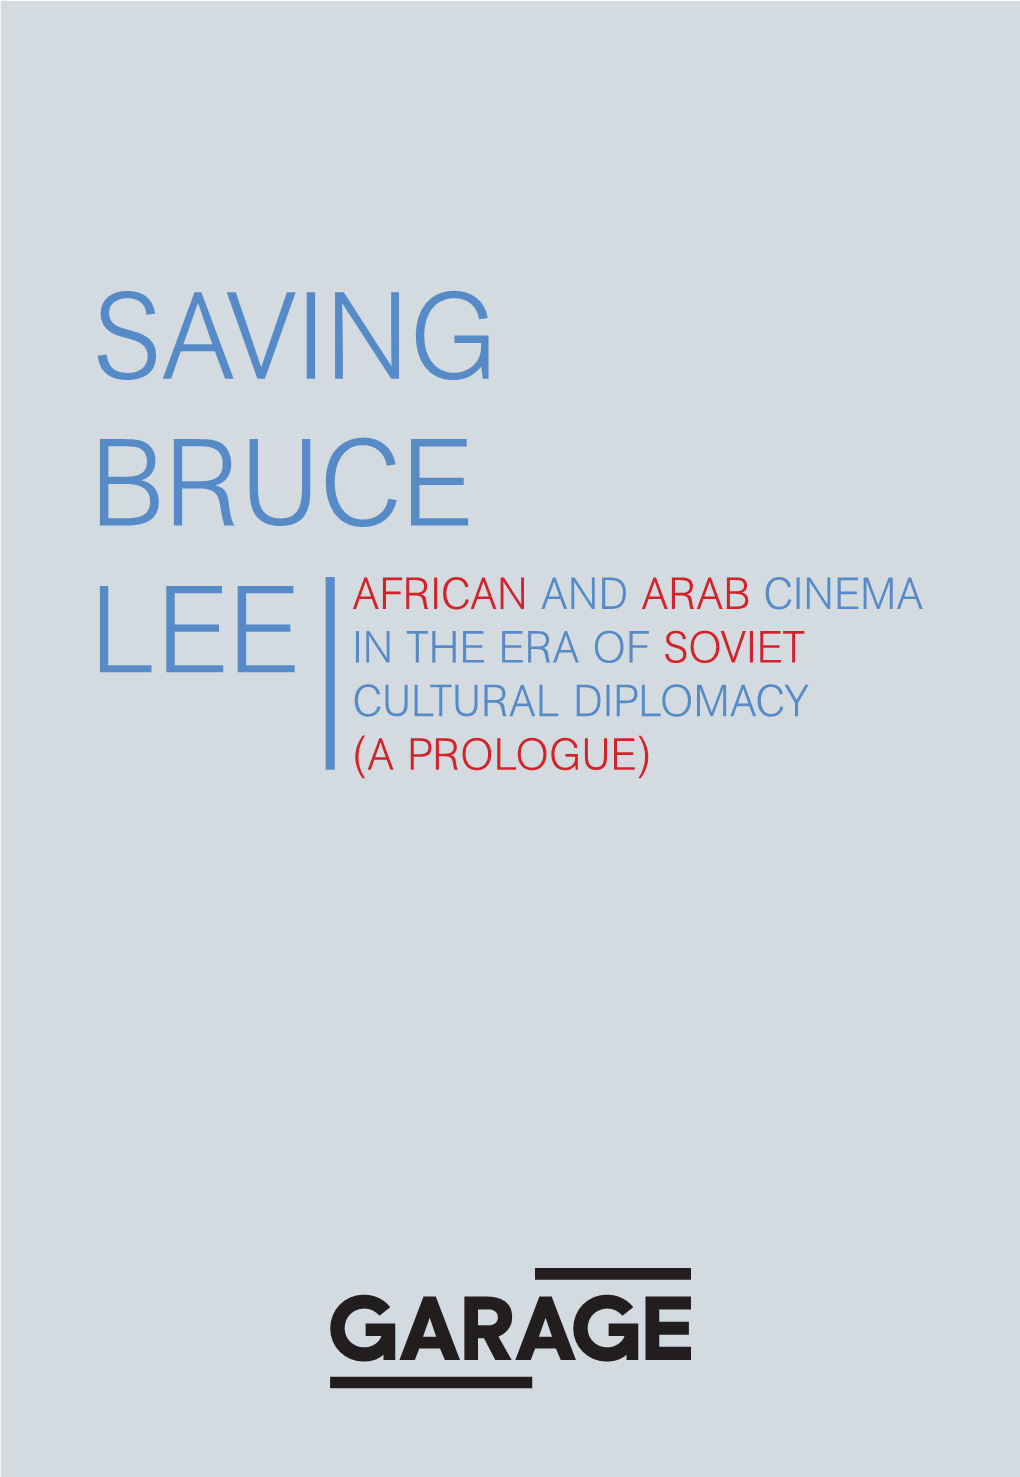 Saving Bruce African and Arab Cinema Lee in the Era of Soviet Cultural Diplomacy (A Prologue) Protagonists